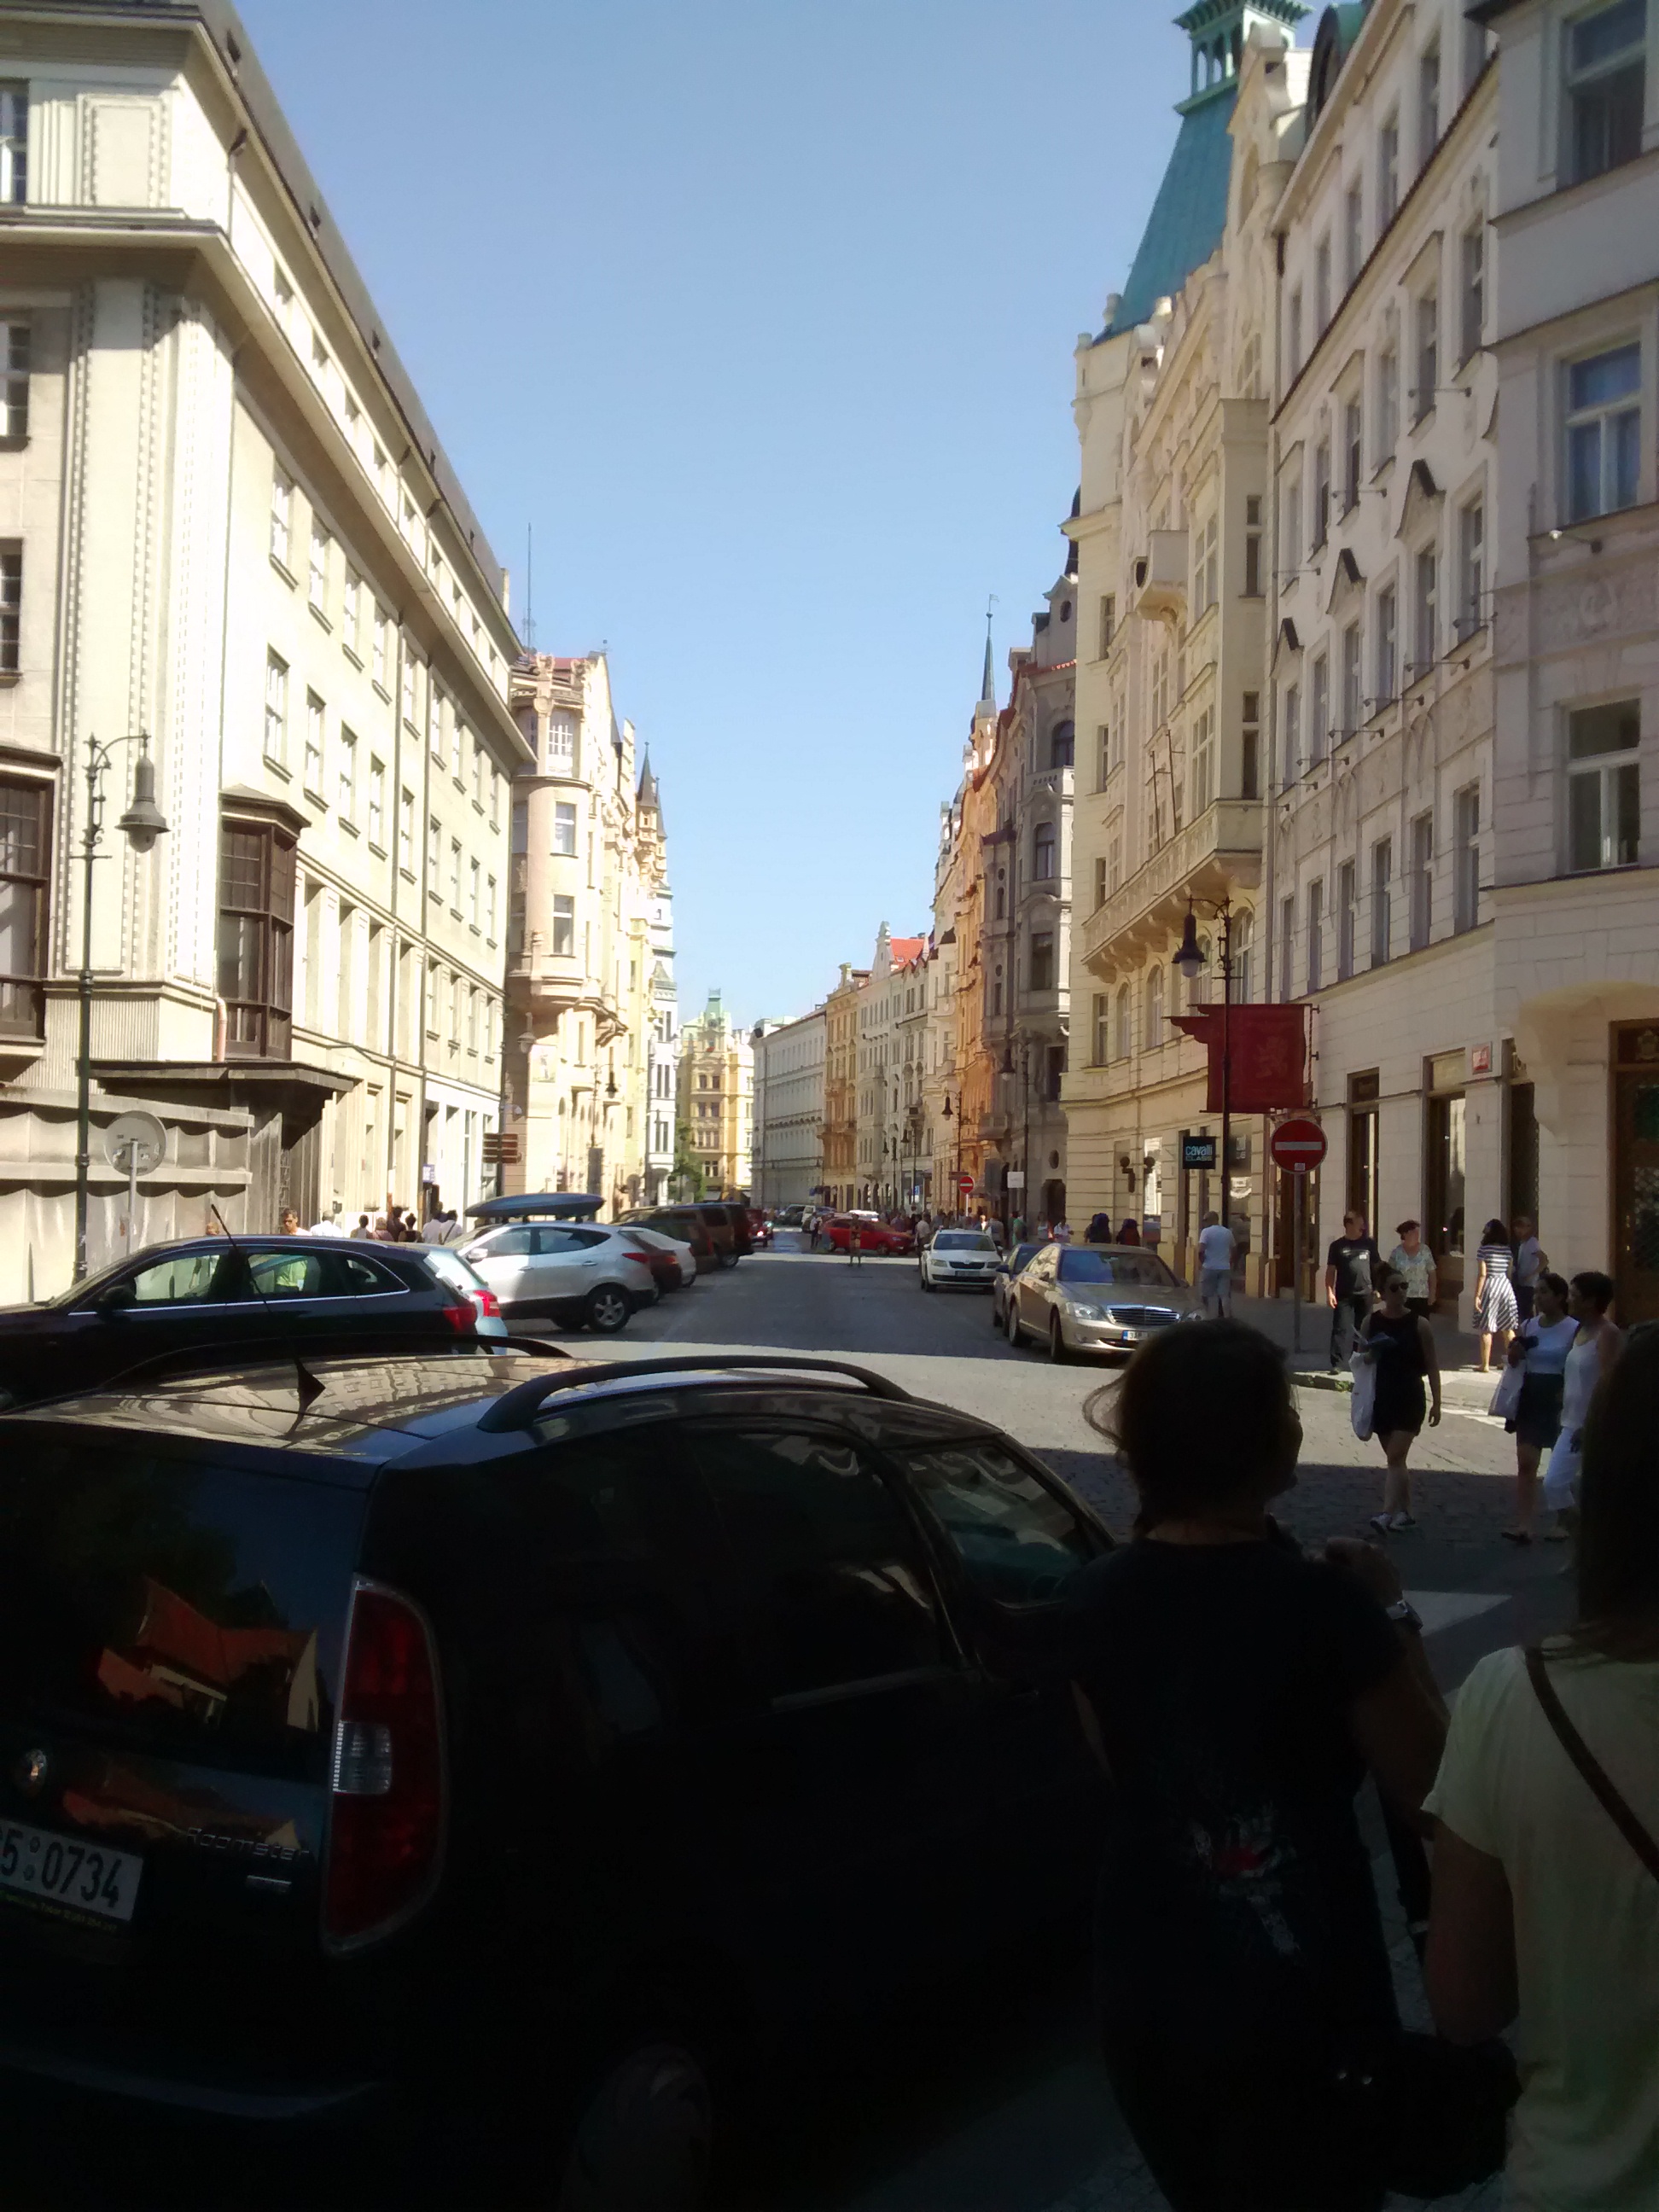 Even the small regular old streets in Prague are breathtaking.